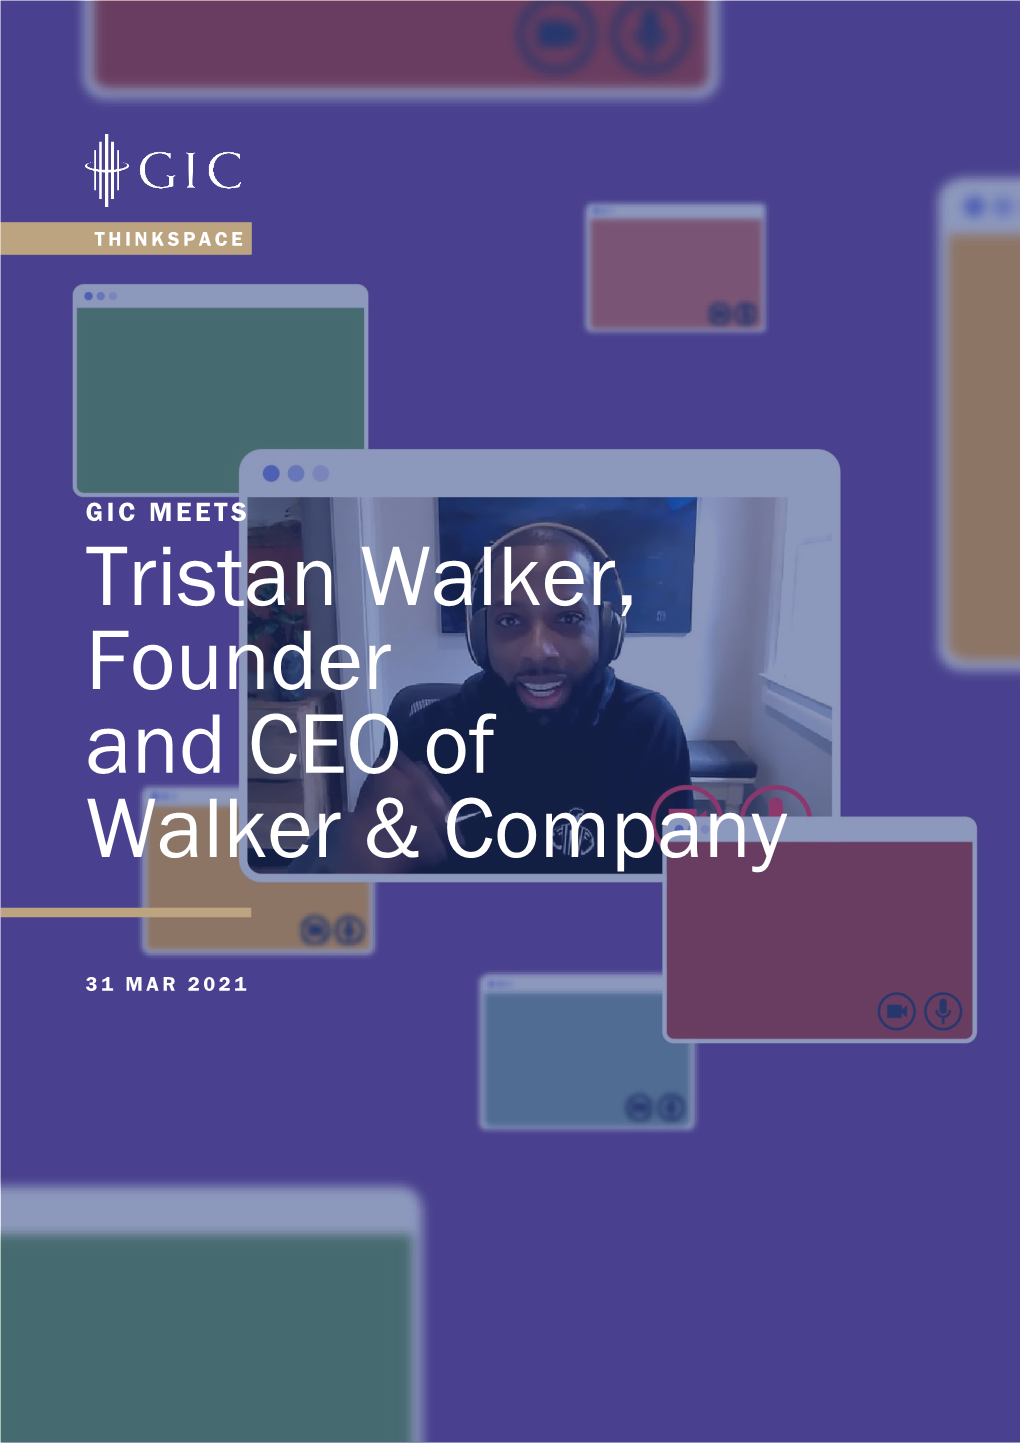 Tristan Walker, Founder and CEO of Walker & Company